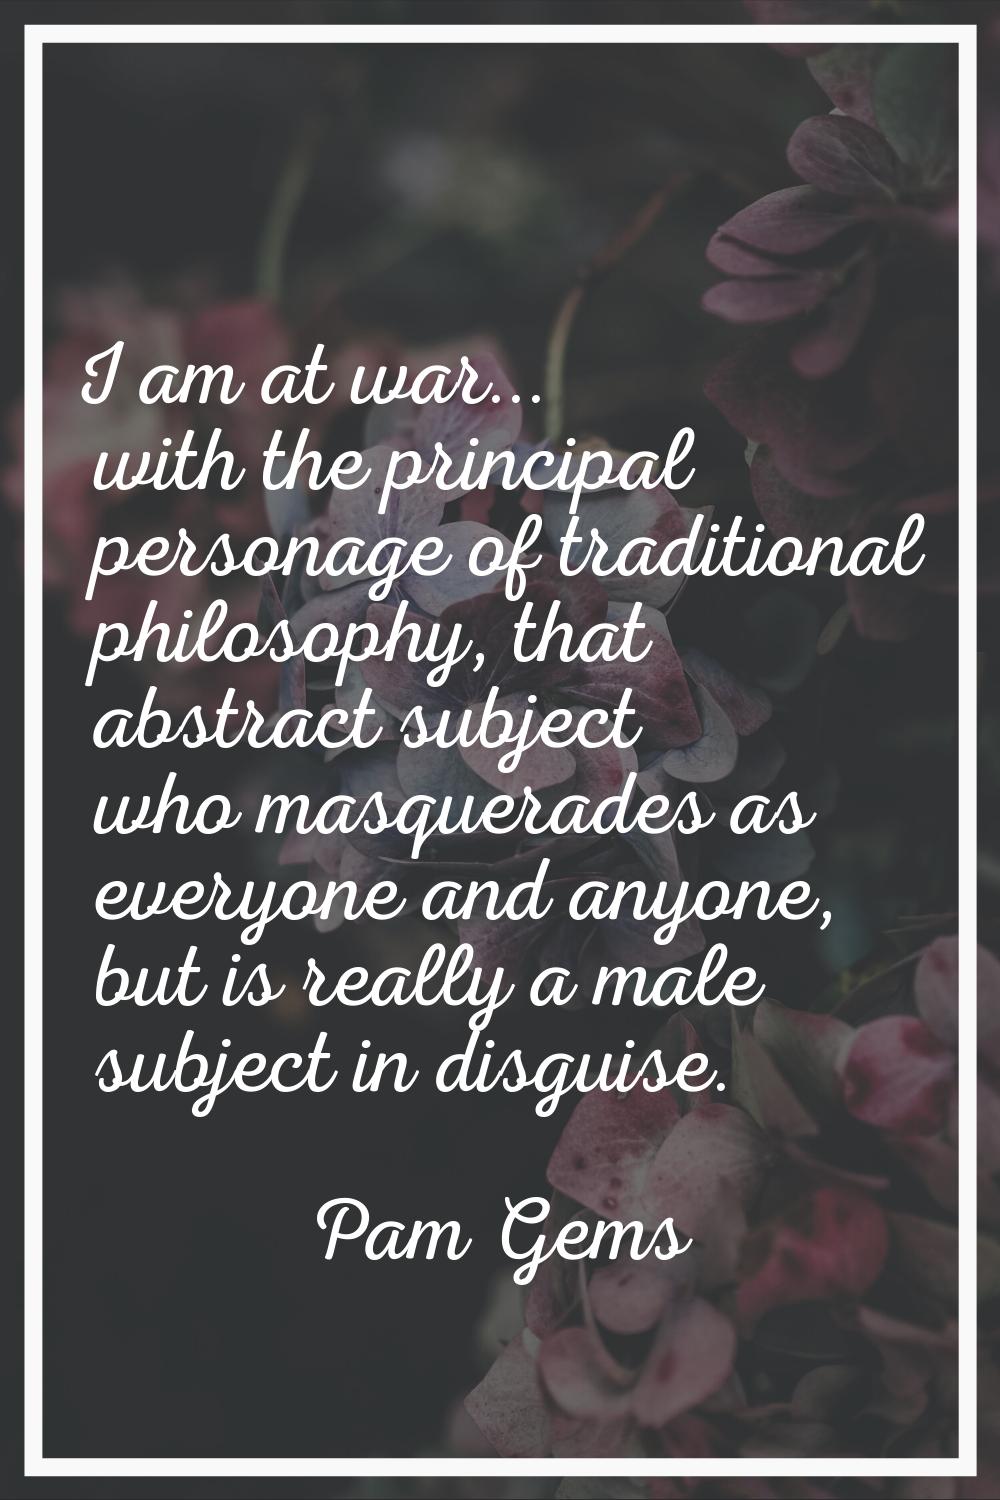 I am at war... with the principal personage of traditional philosophy, that abstract subject who ma